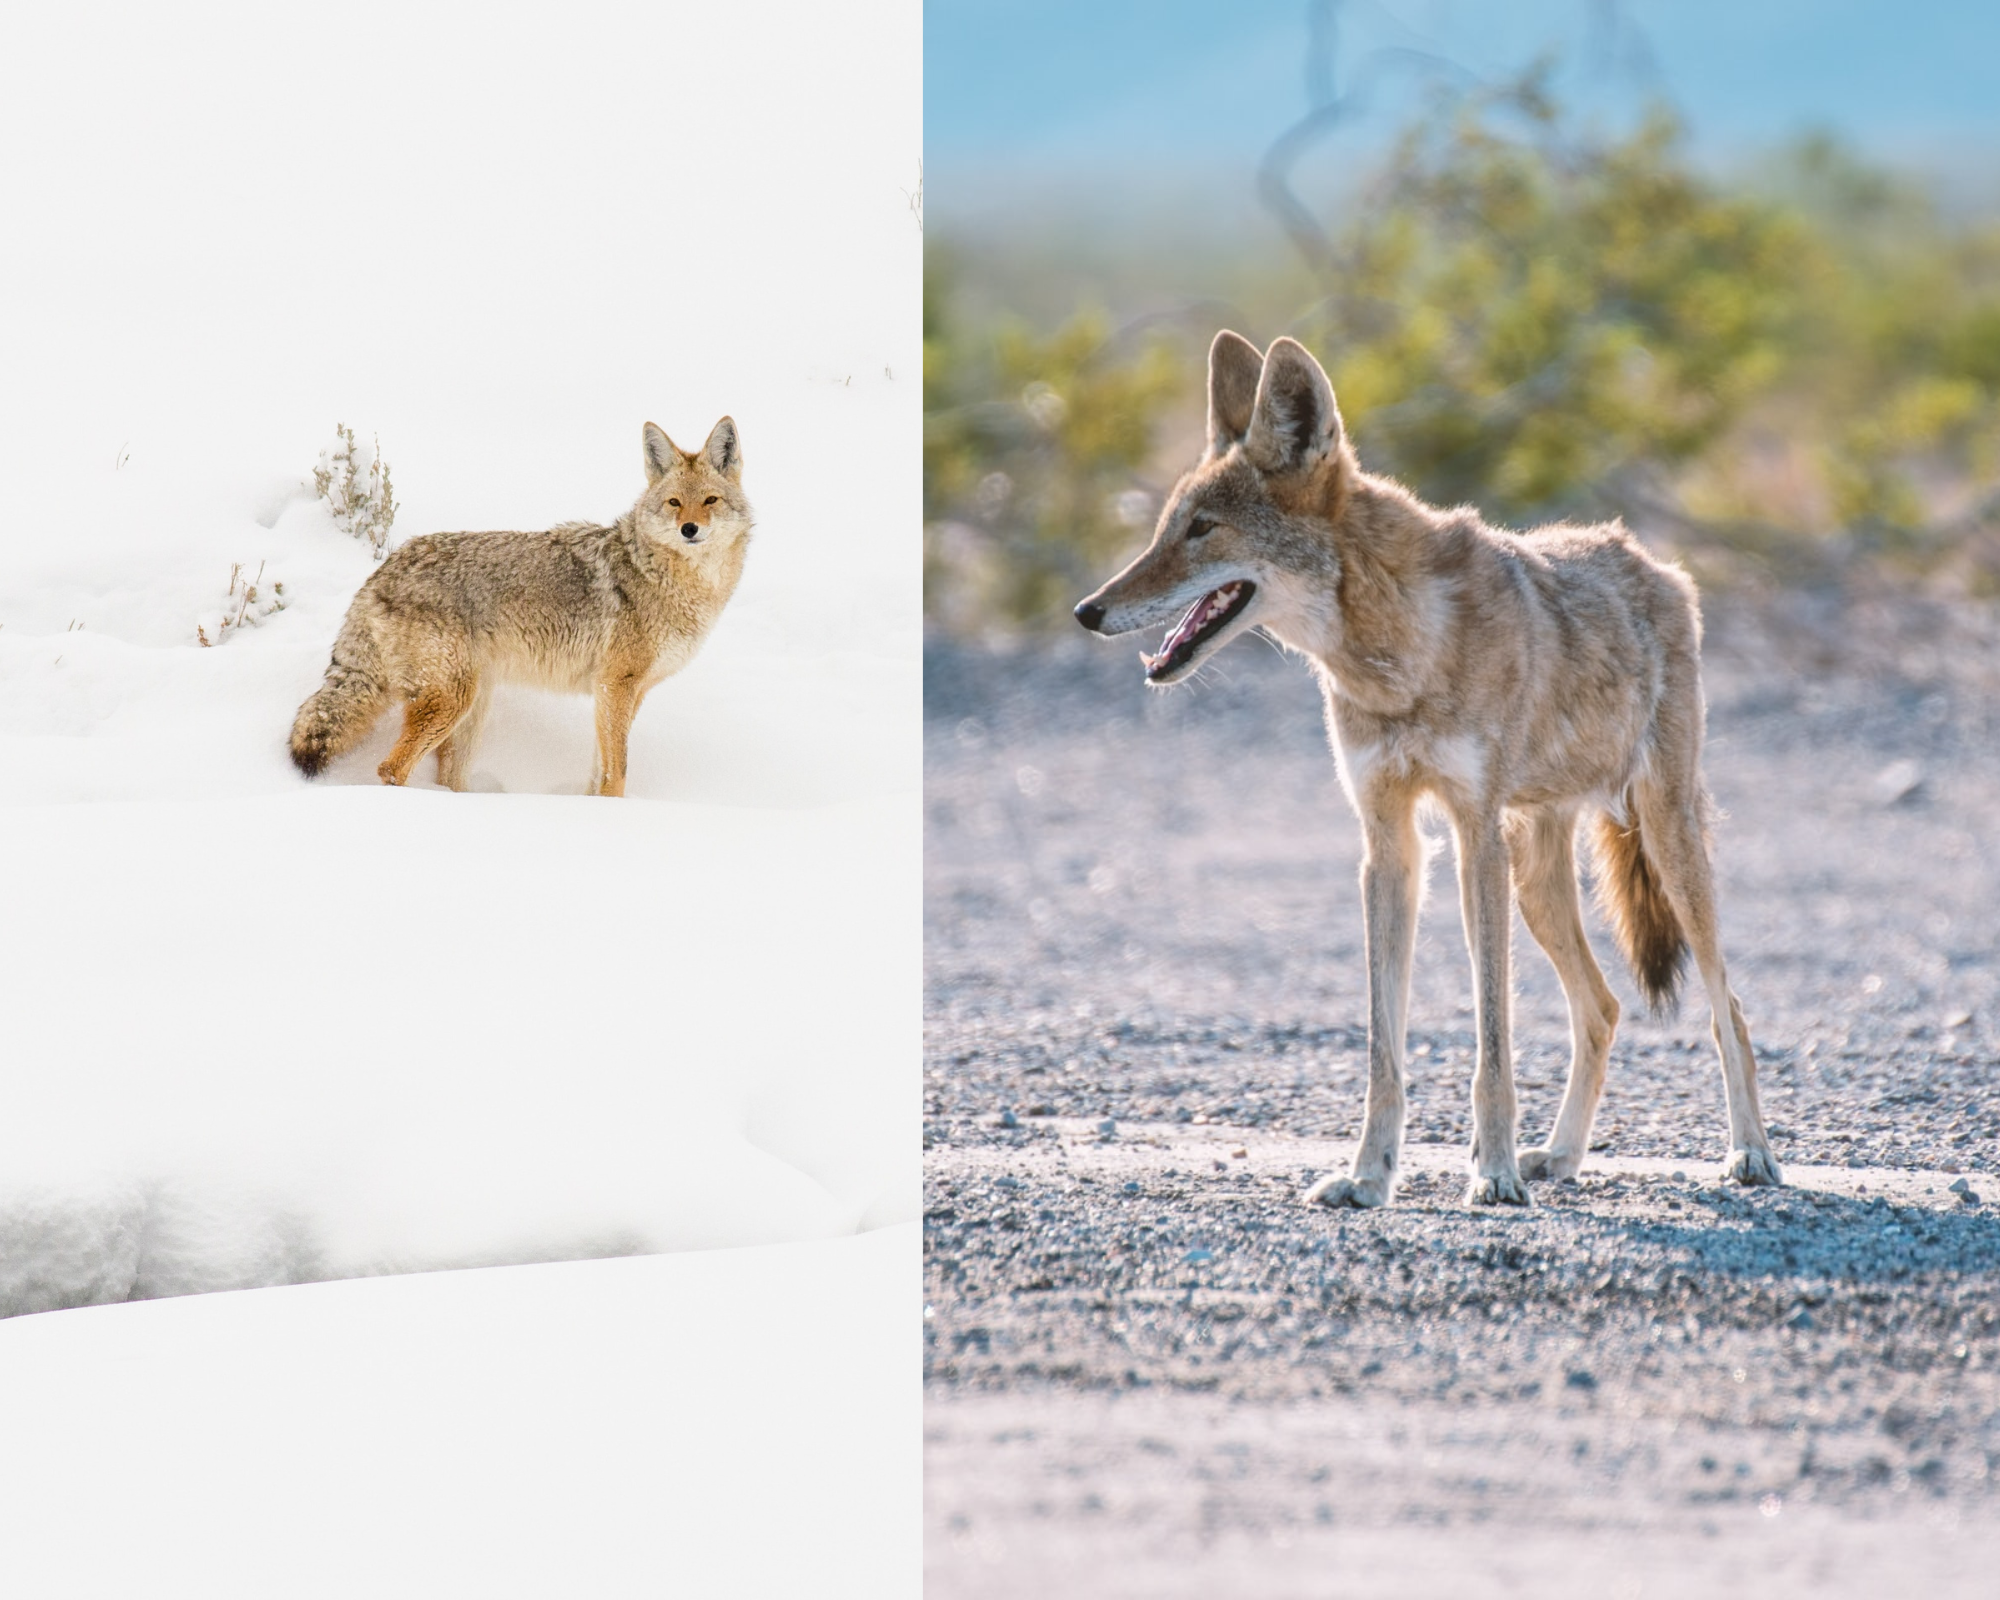 Coyote pictured in Yosemite versus coyote pictured in Death Valley